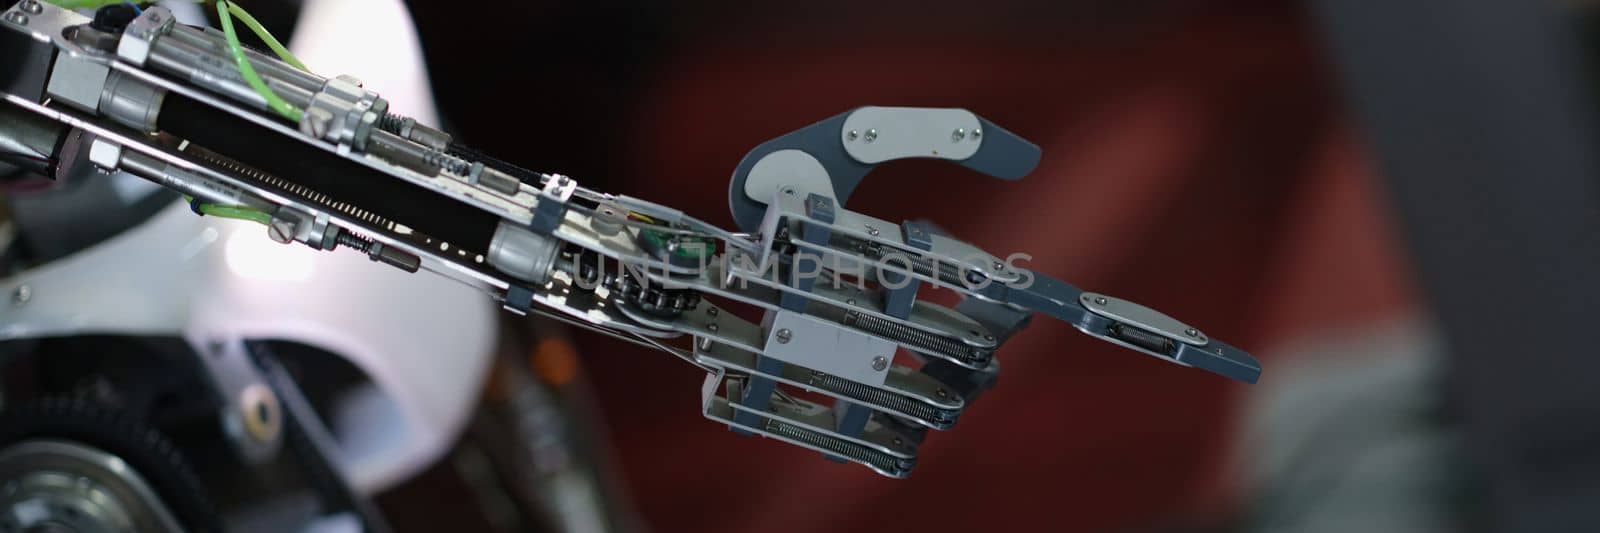 Robot hand pointing with index finger and touching gesture by kuprevich